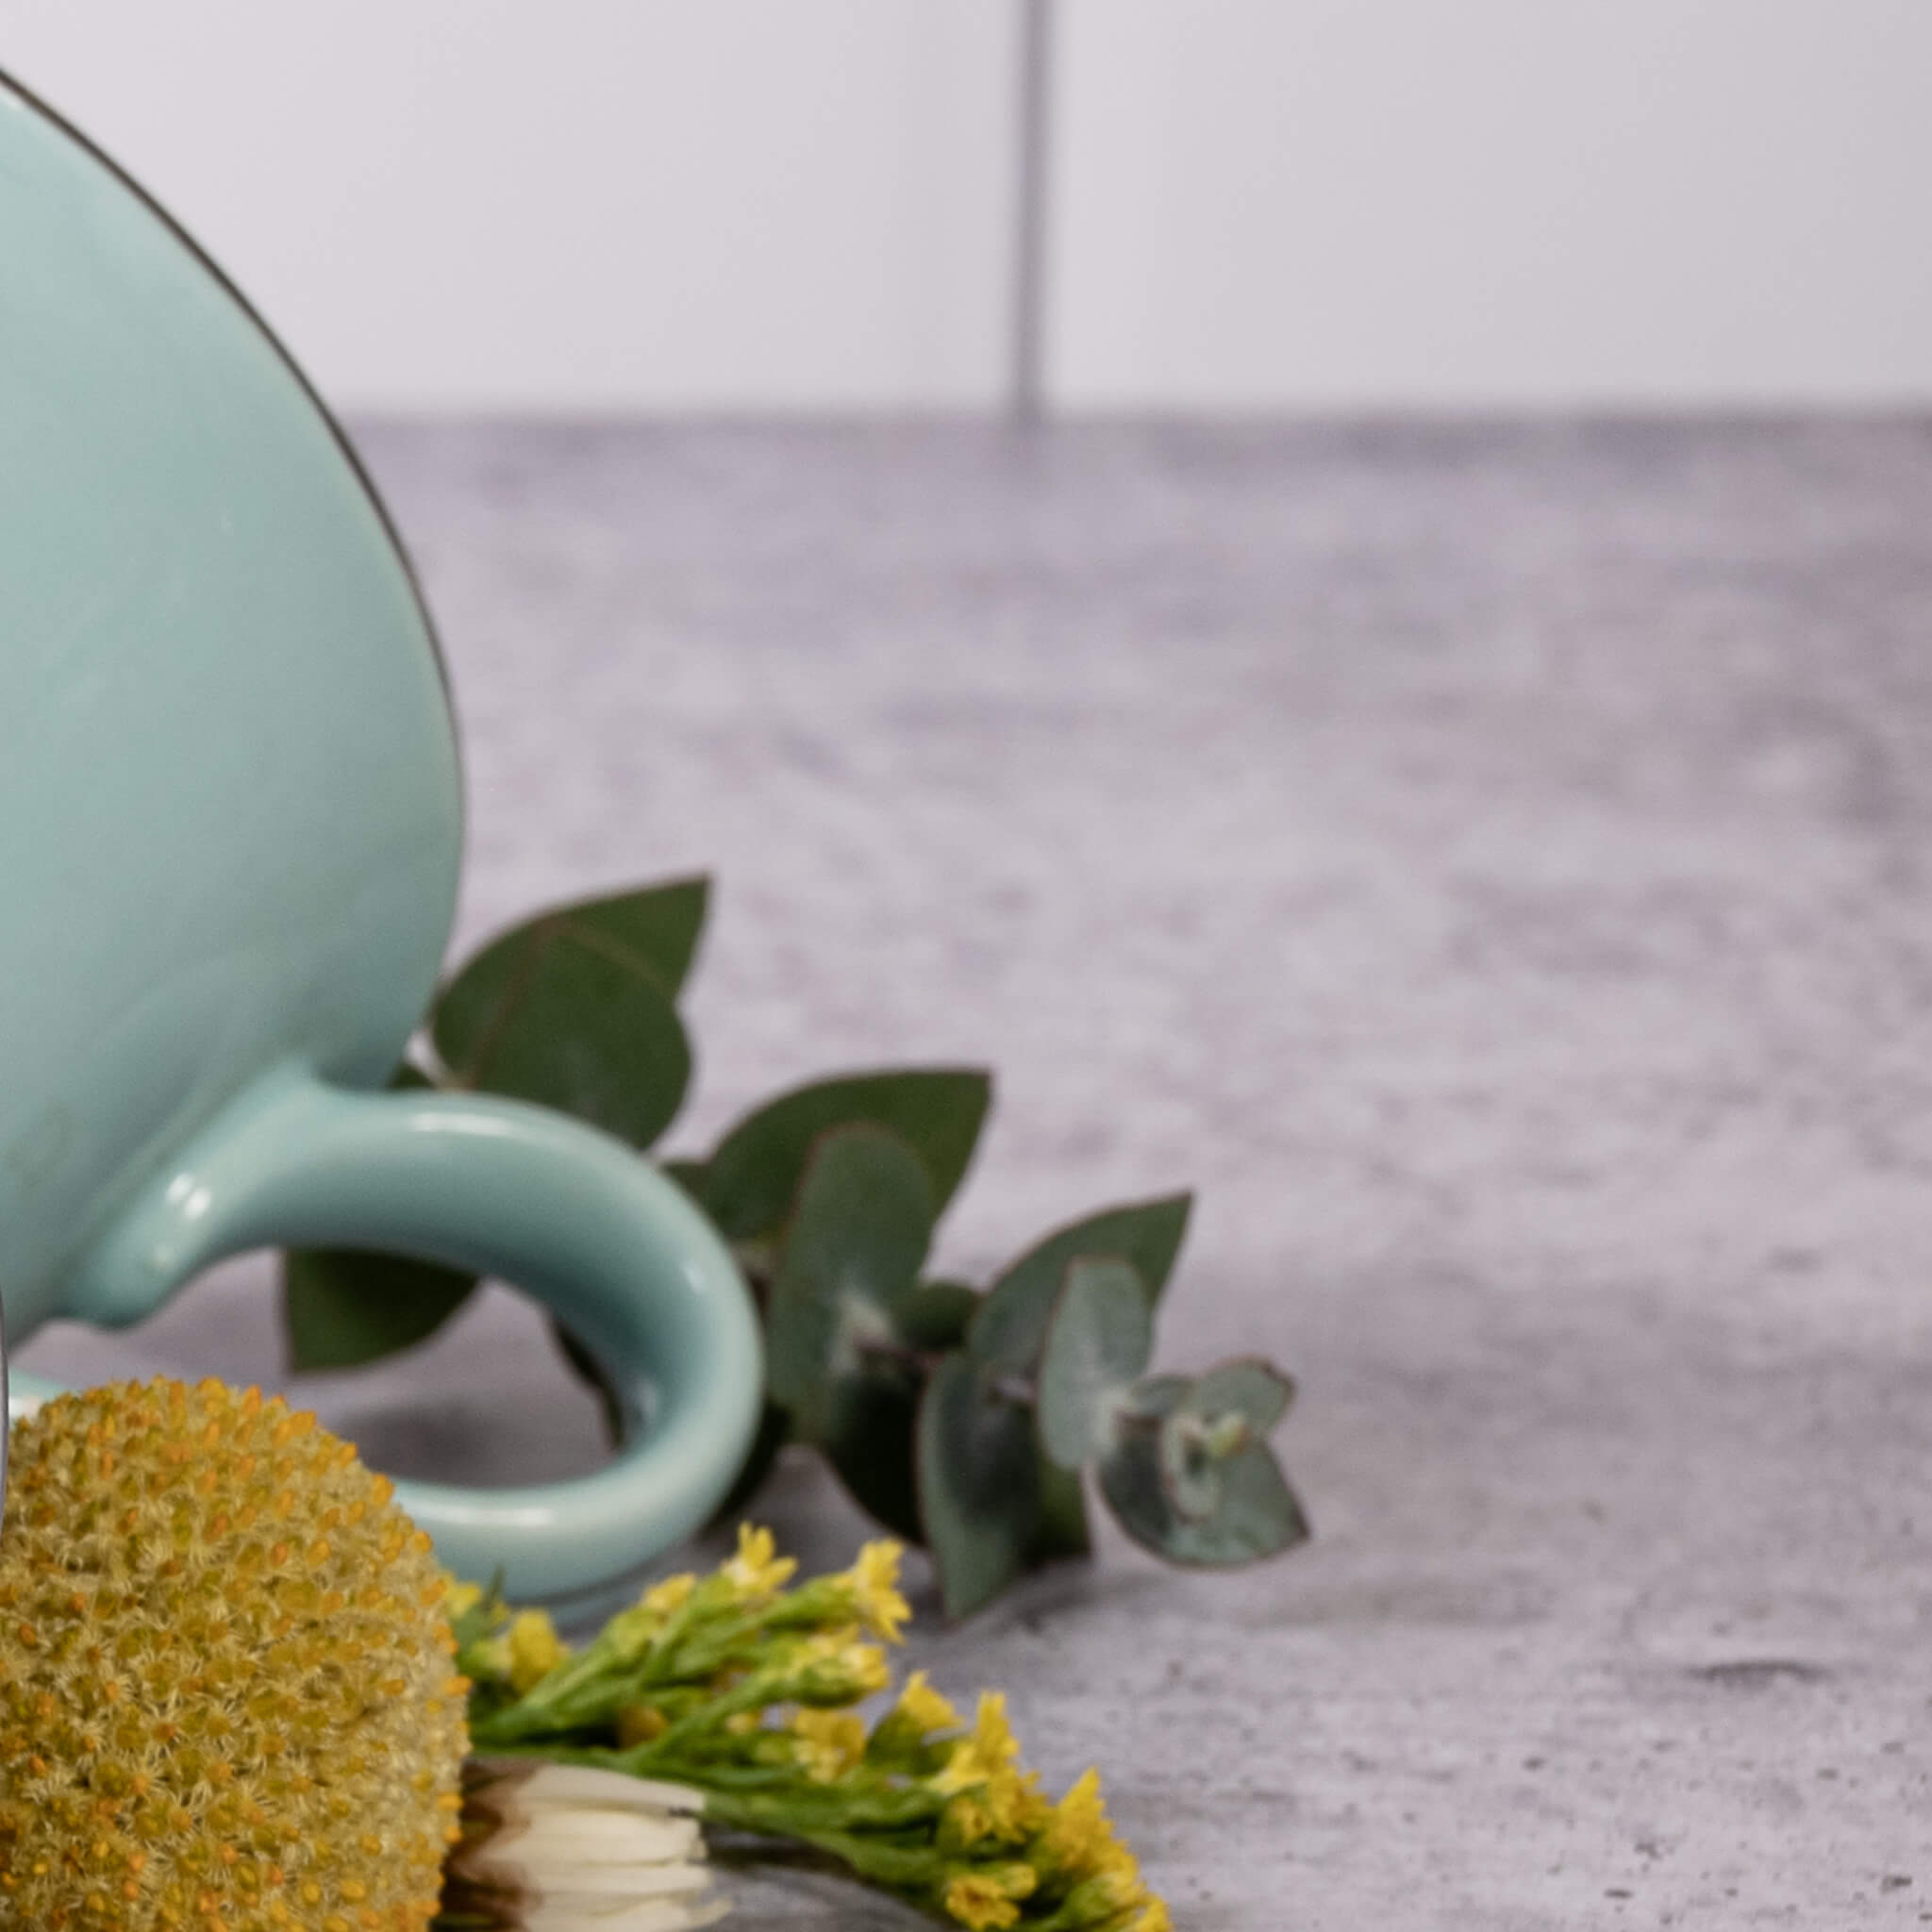 A turquoise mug and flowers on a concrete counter.